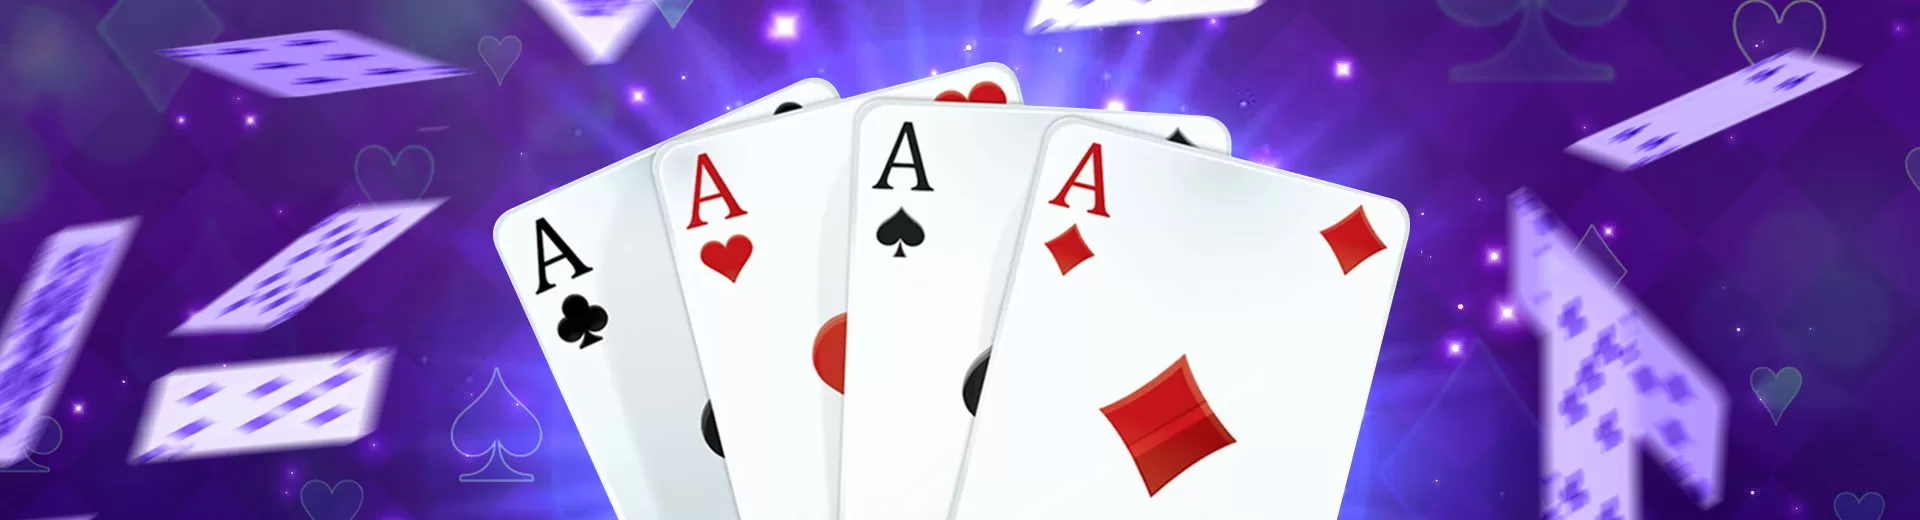 All In One Solitaire Emulator Pc